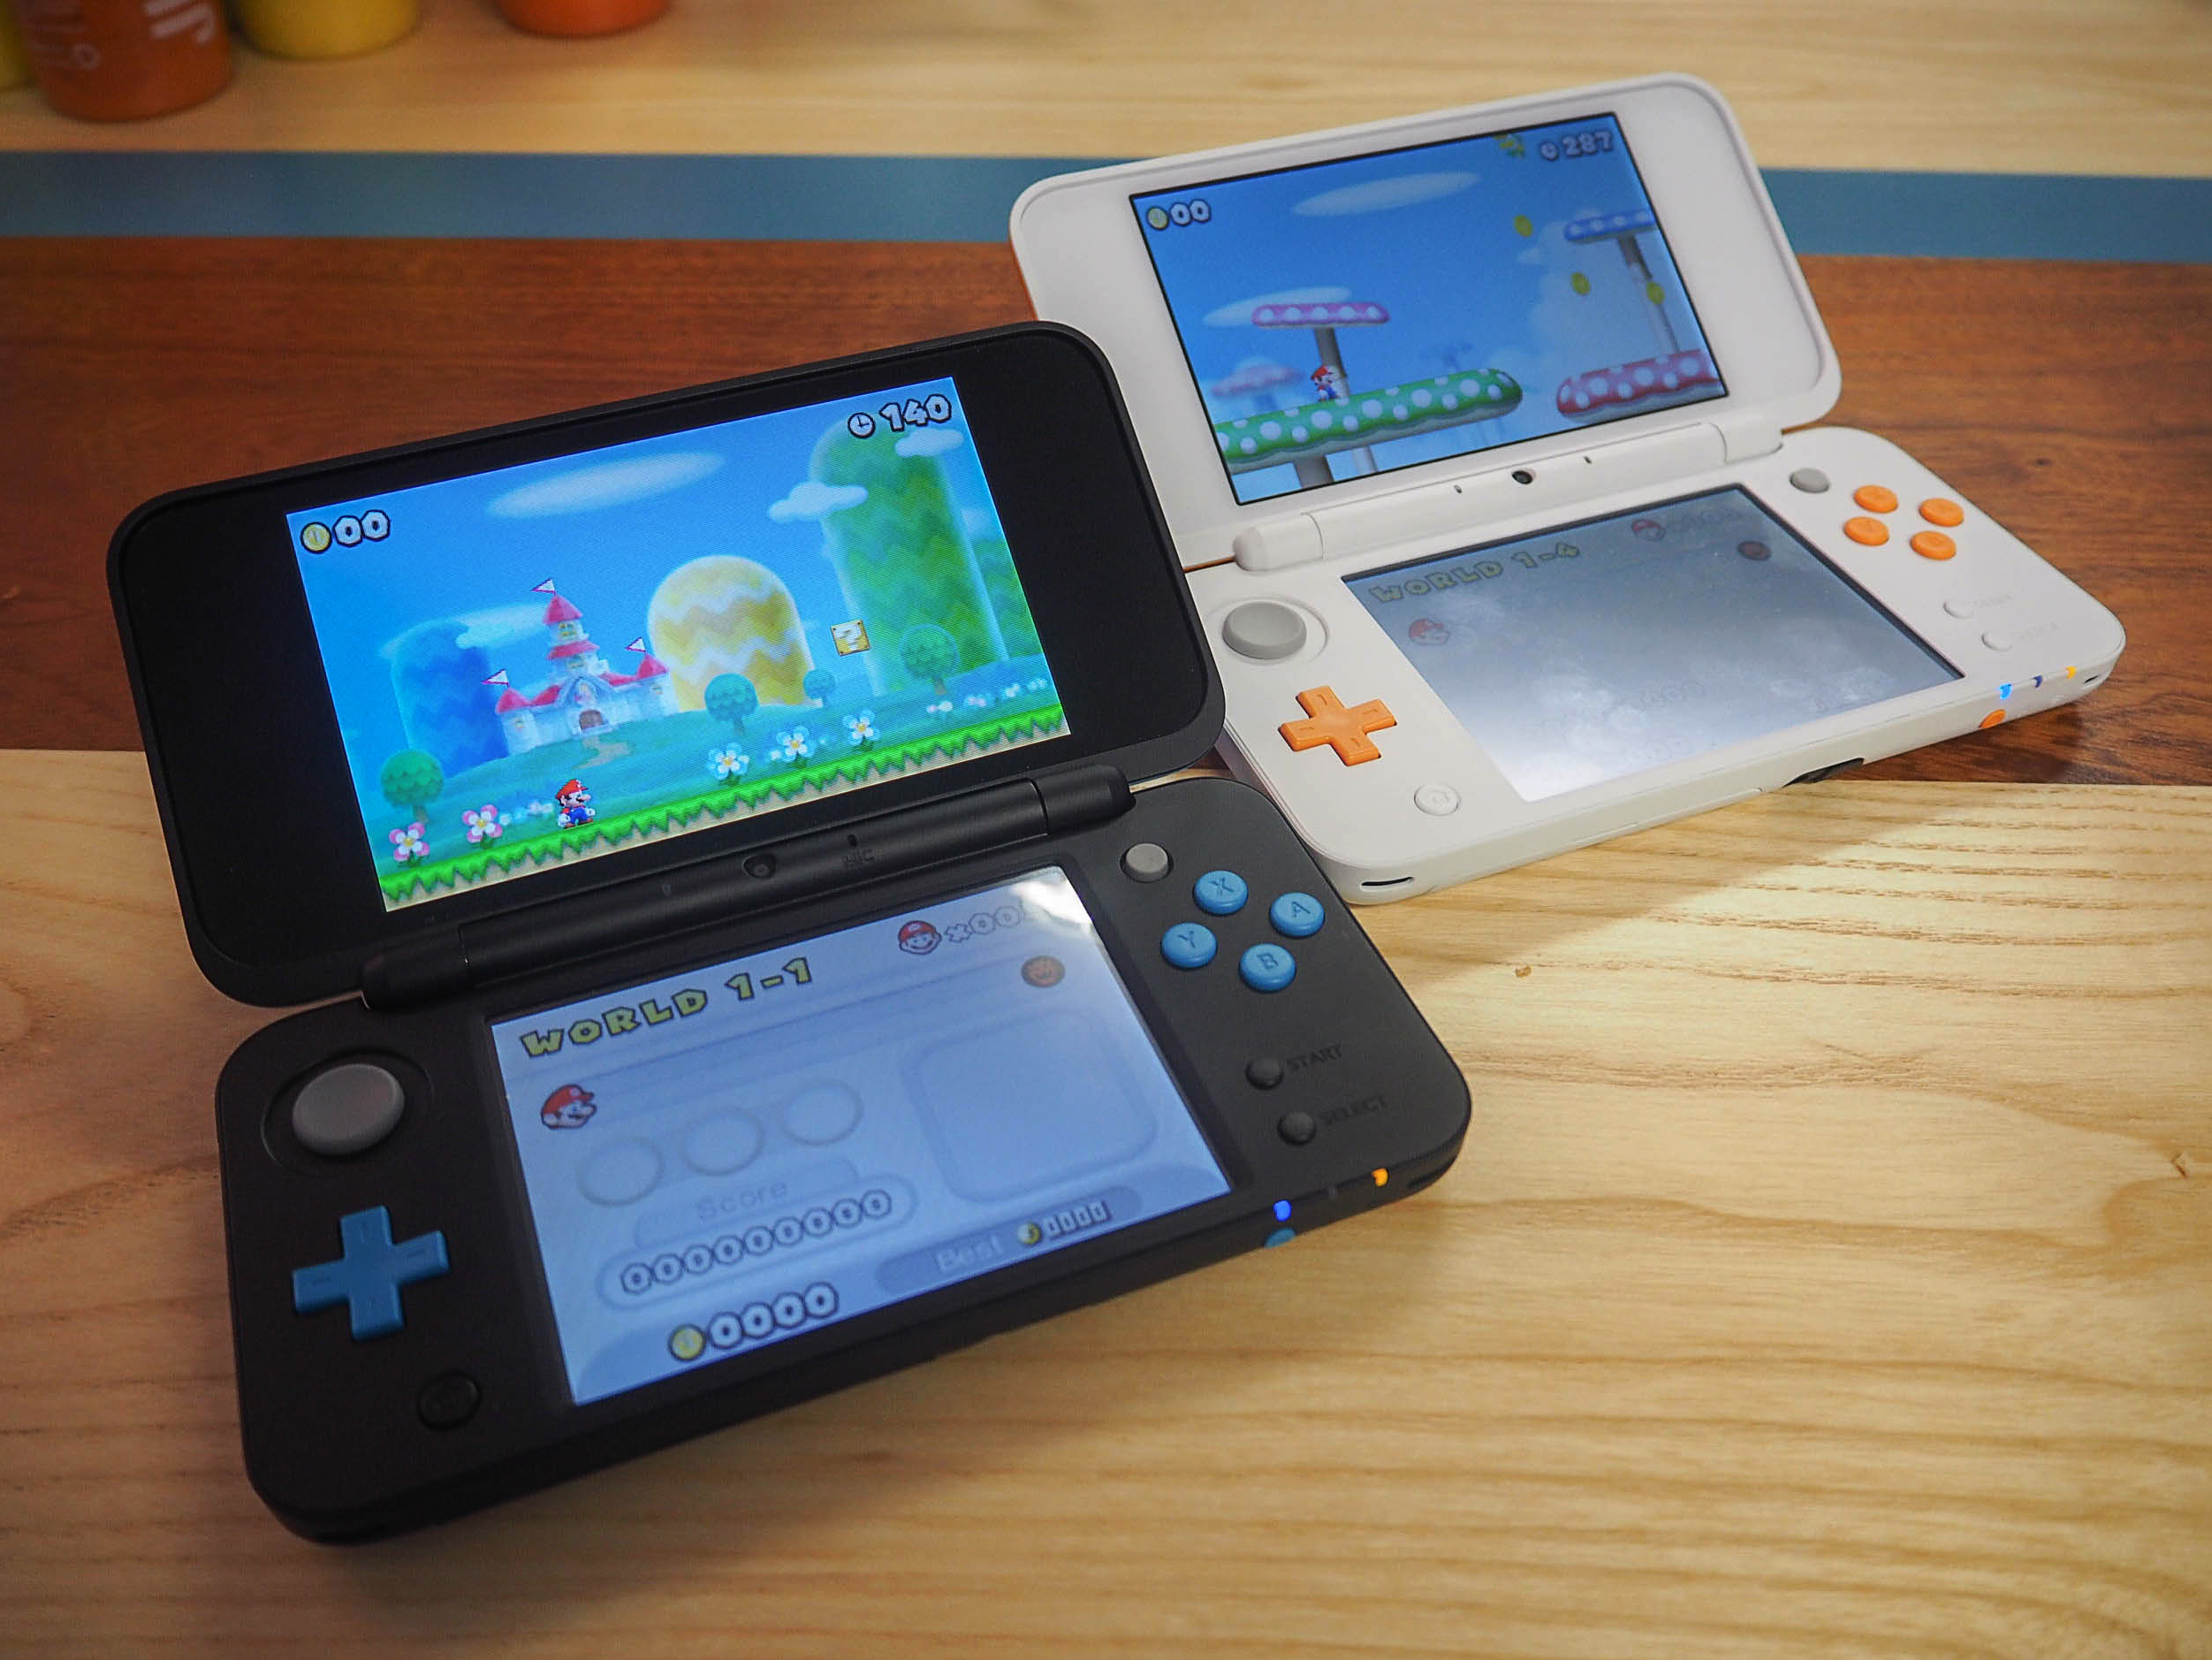 New 2DS XL vs New 3DS XL vs 2DS: which one should you get?